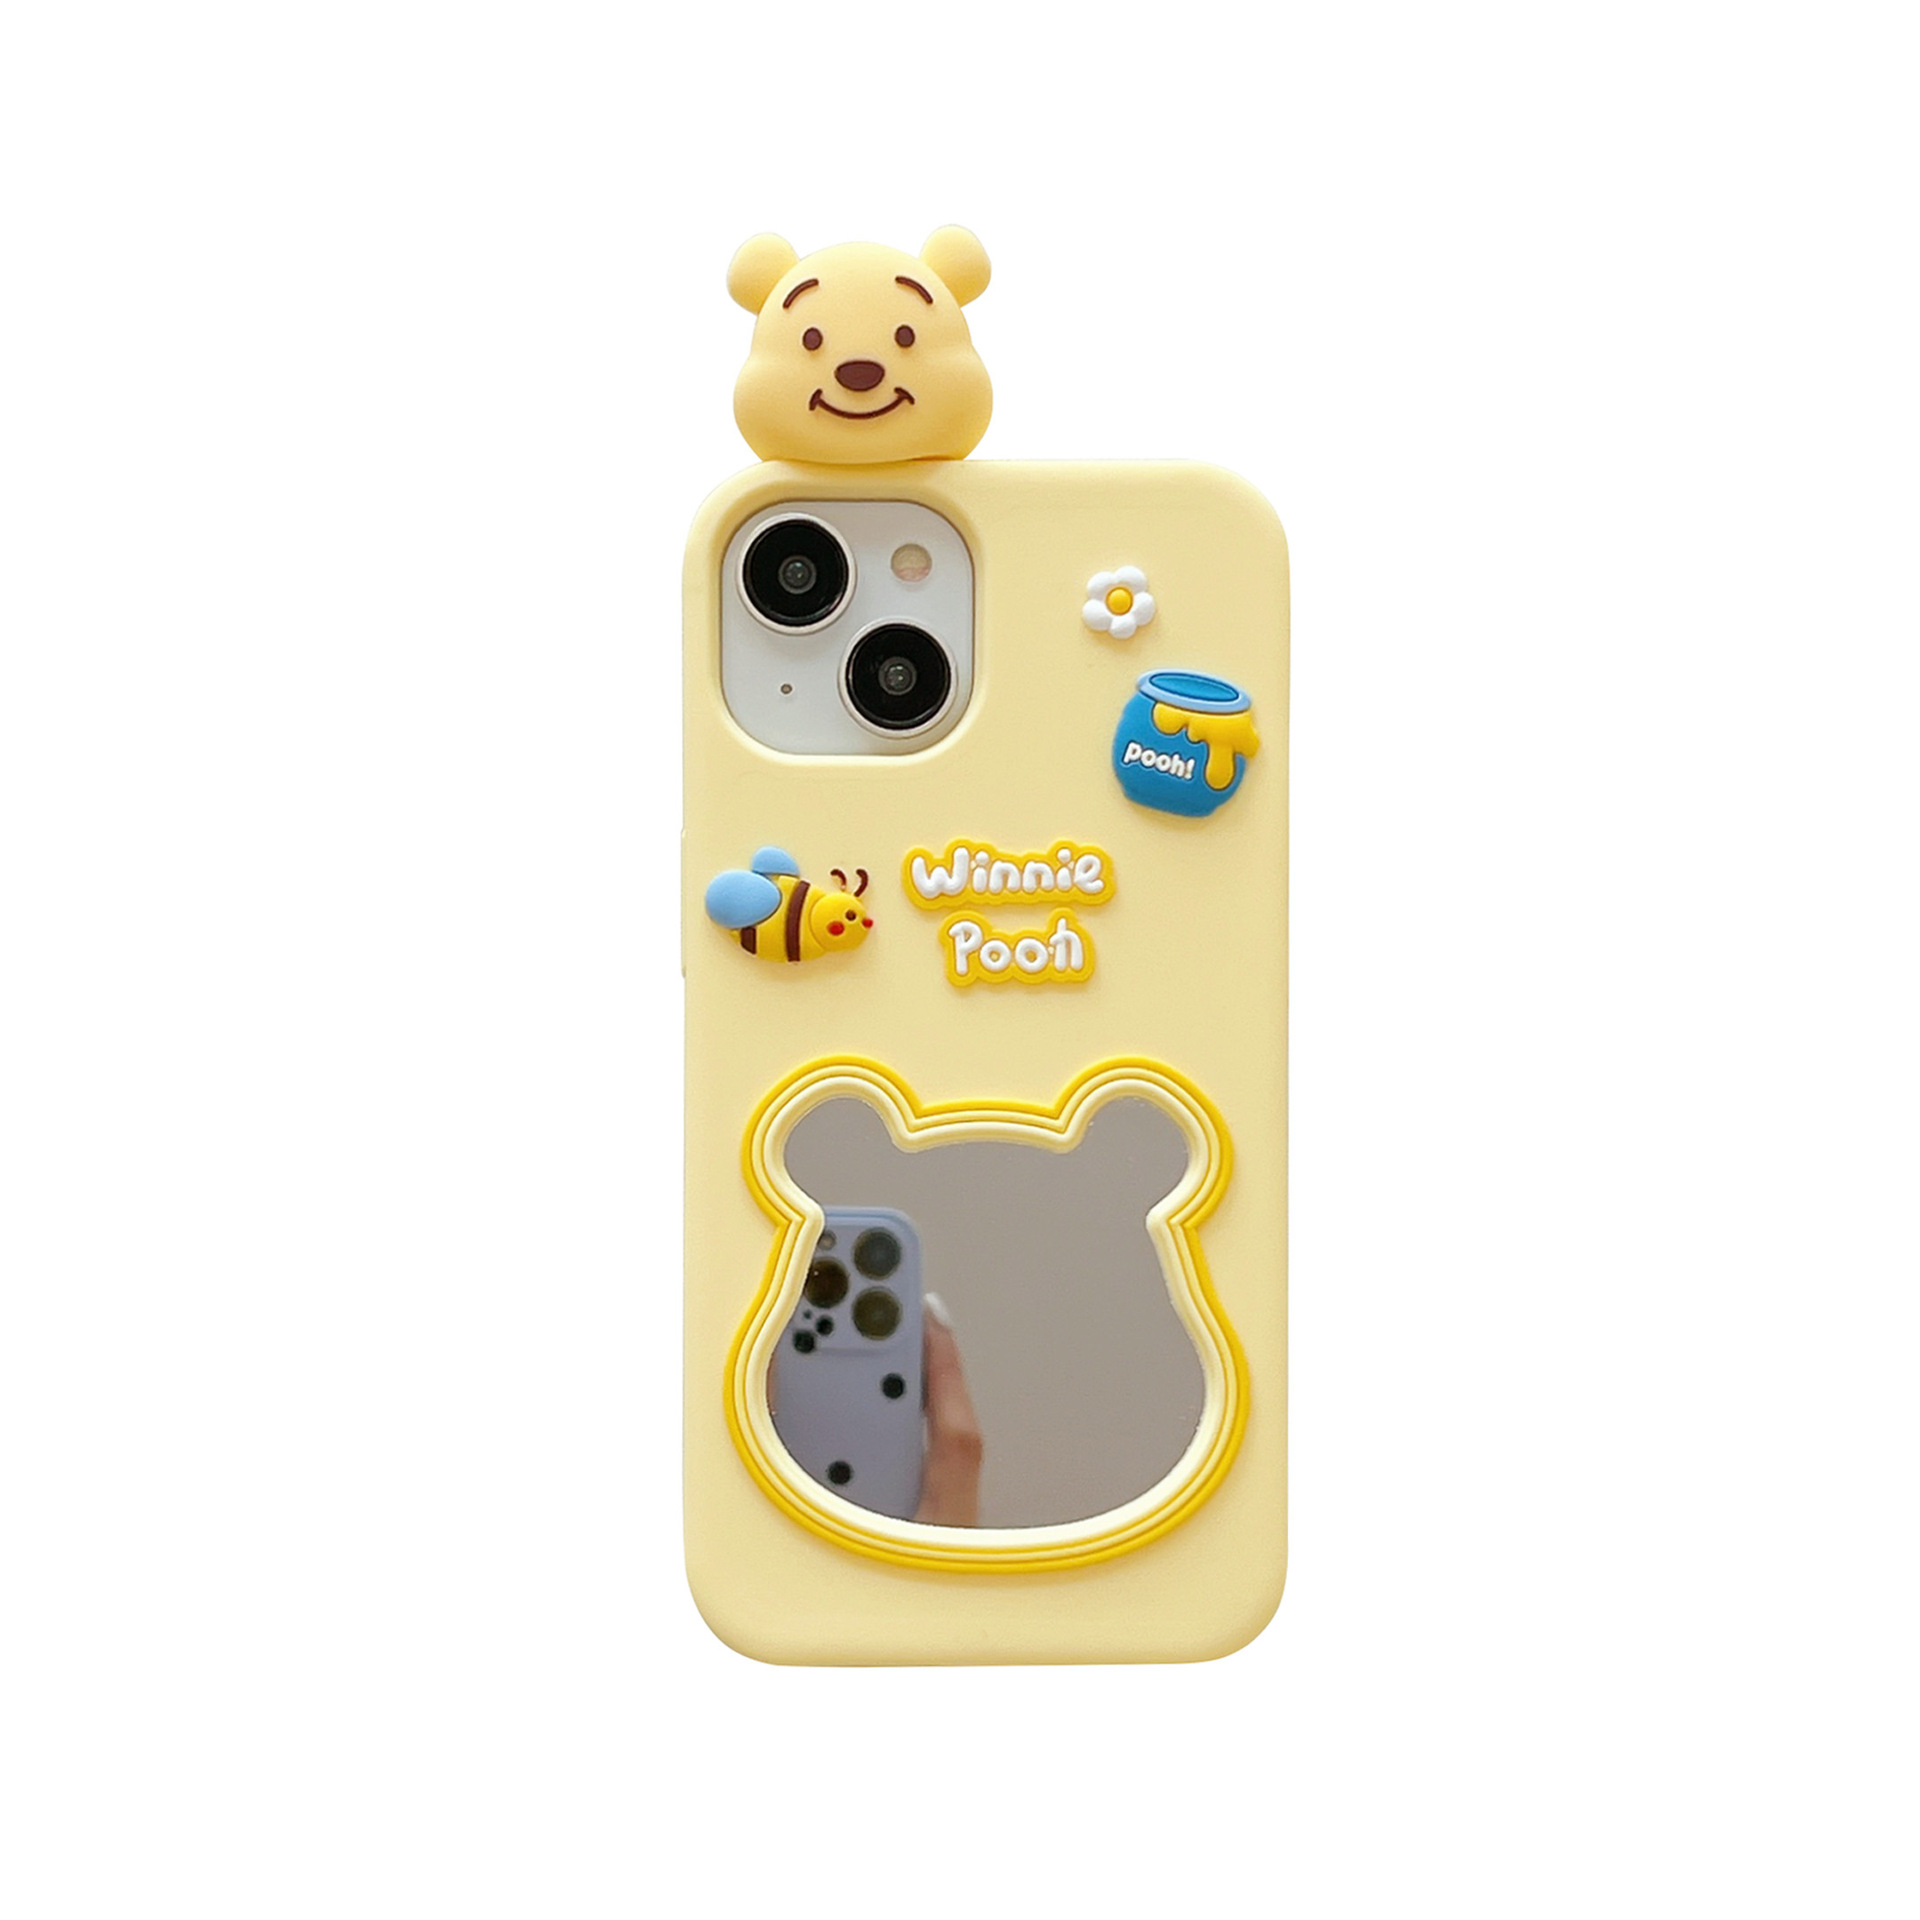 Bear-shaped phone casing with a mirror on the back silicon mobile cover customized